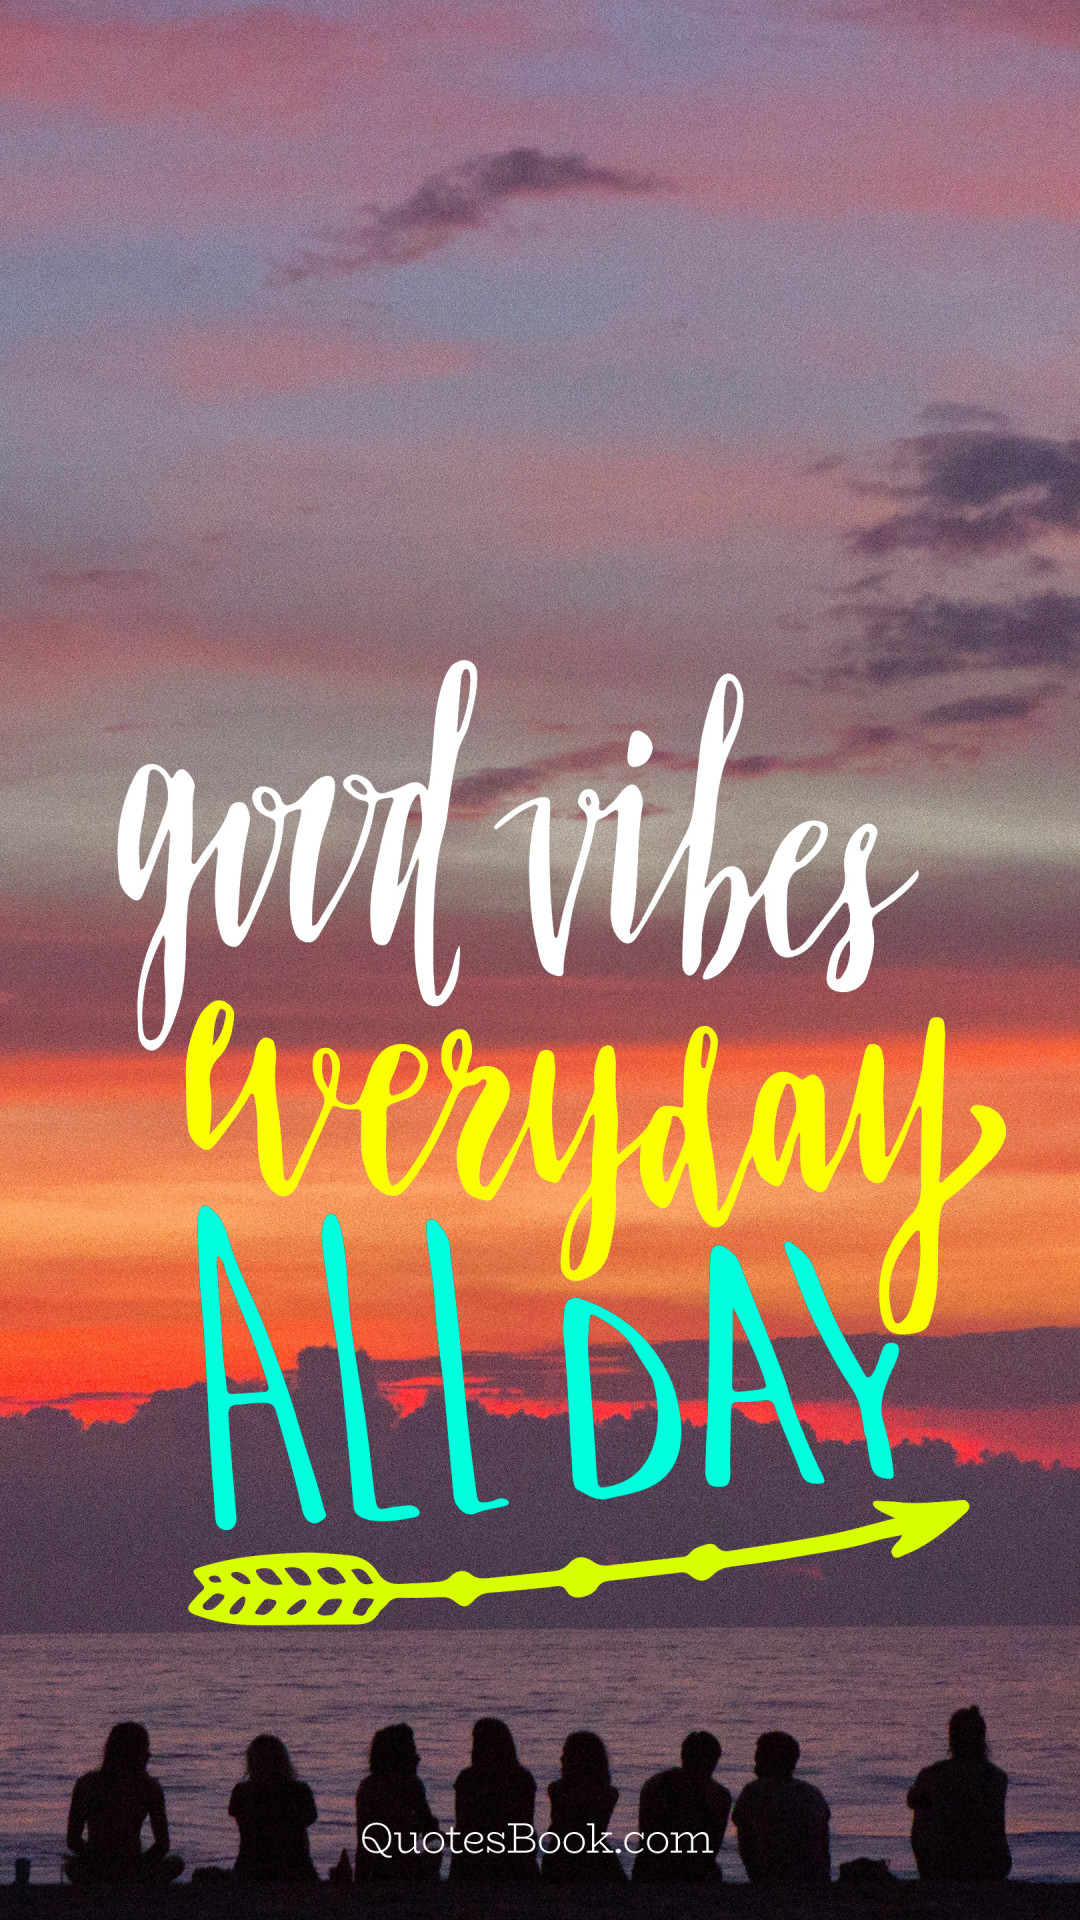 Good vibes everyday all day - QuotesBook